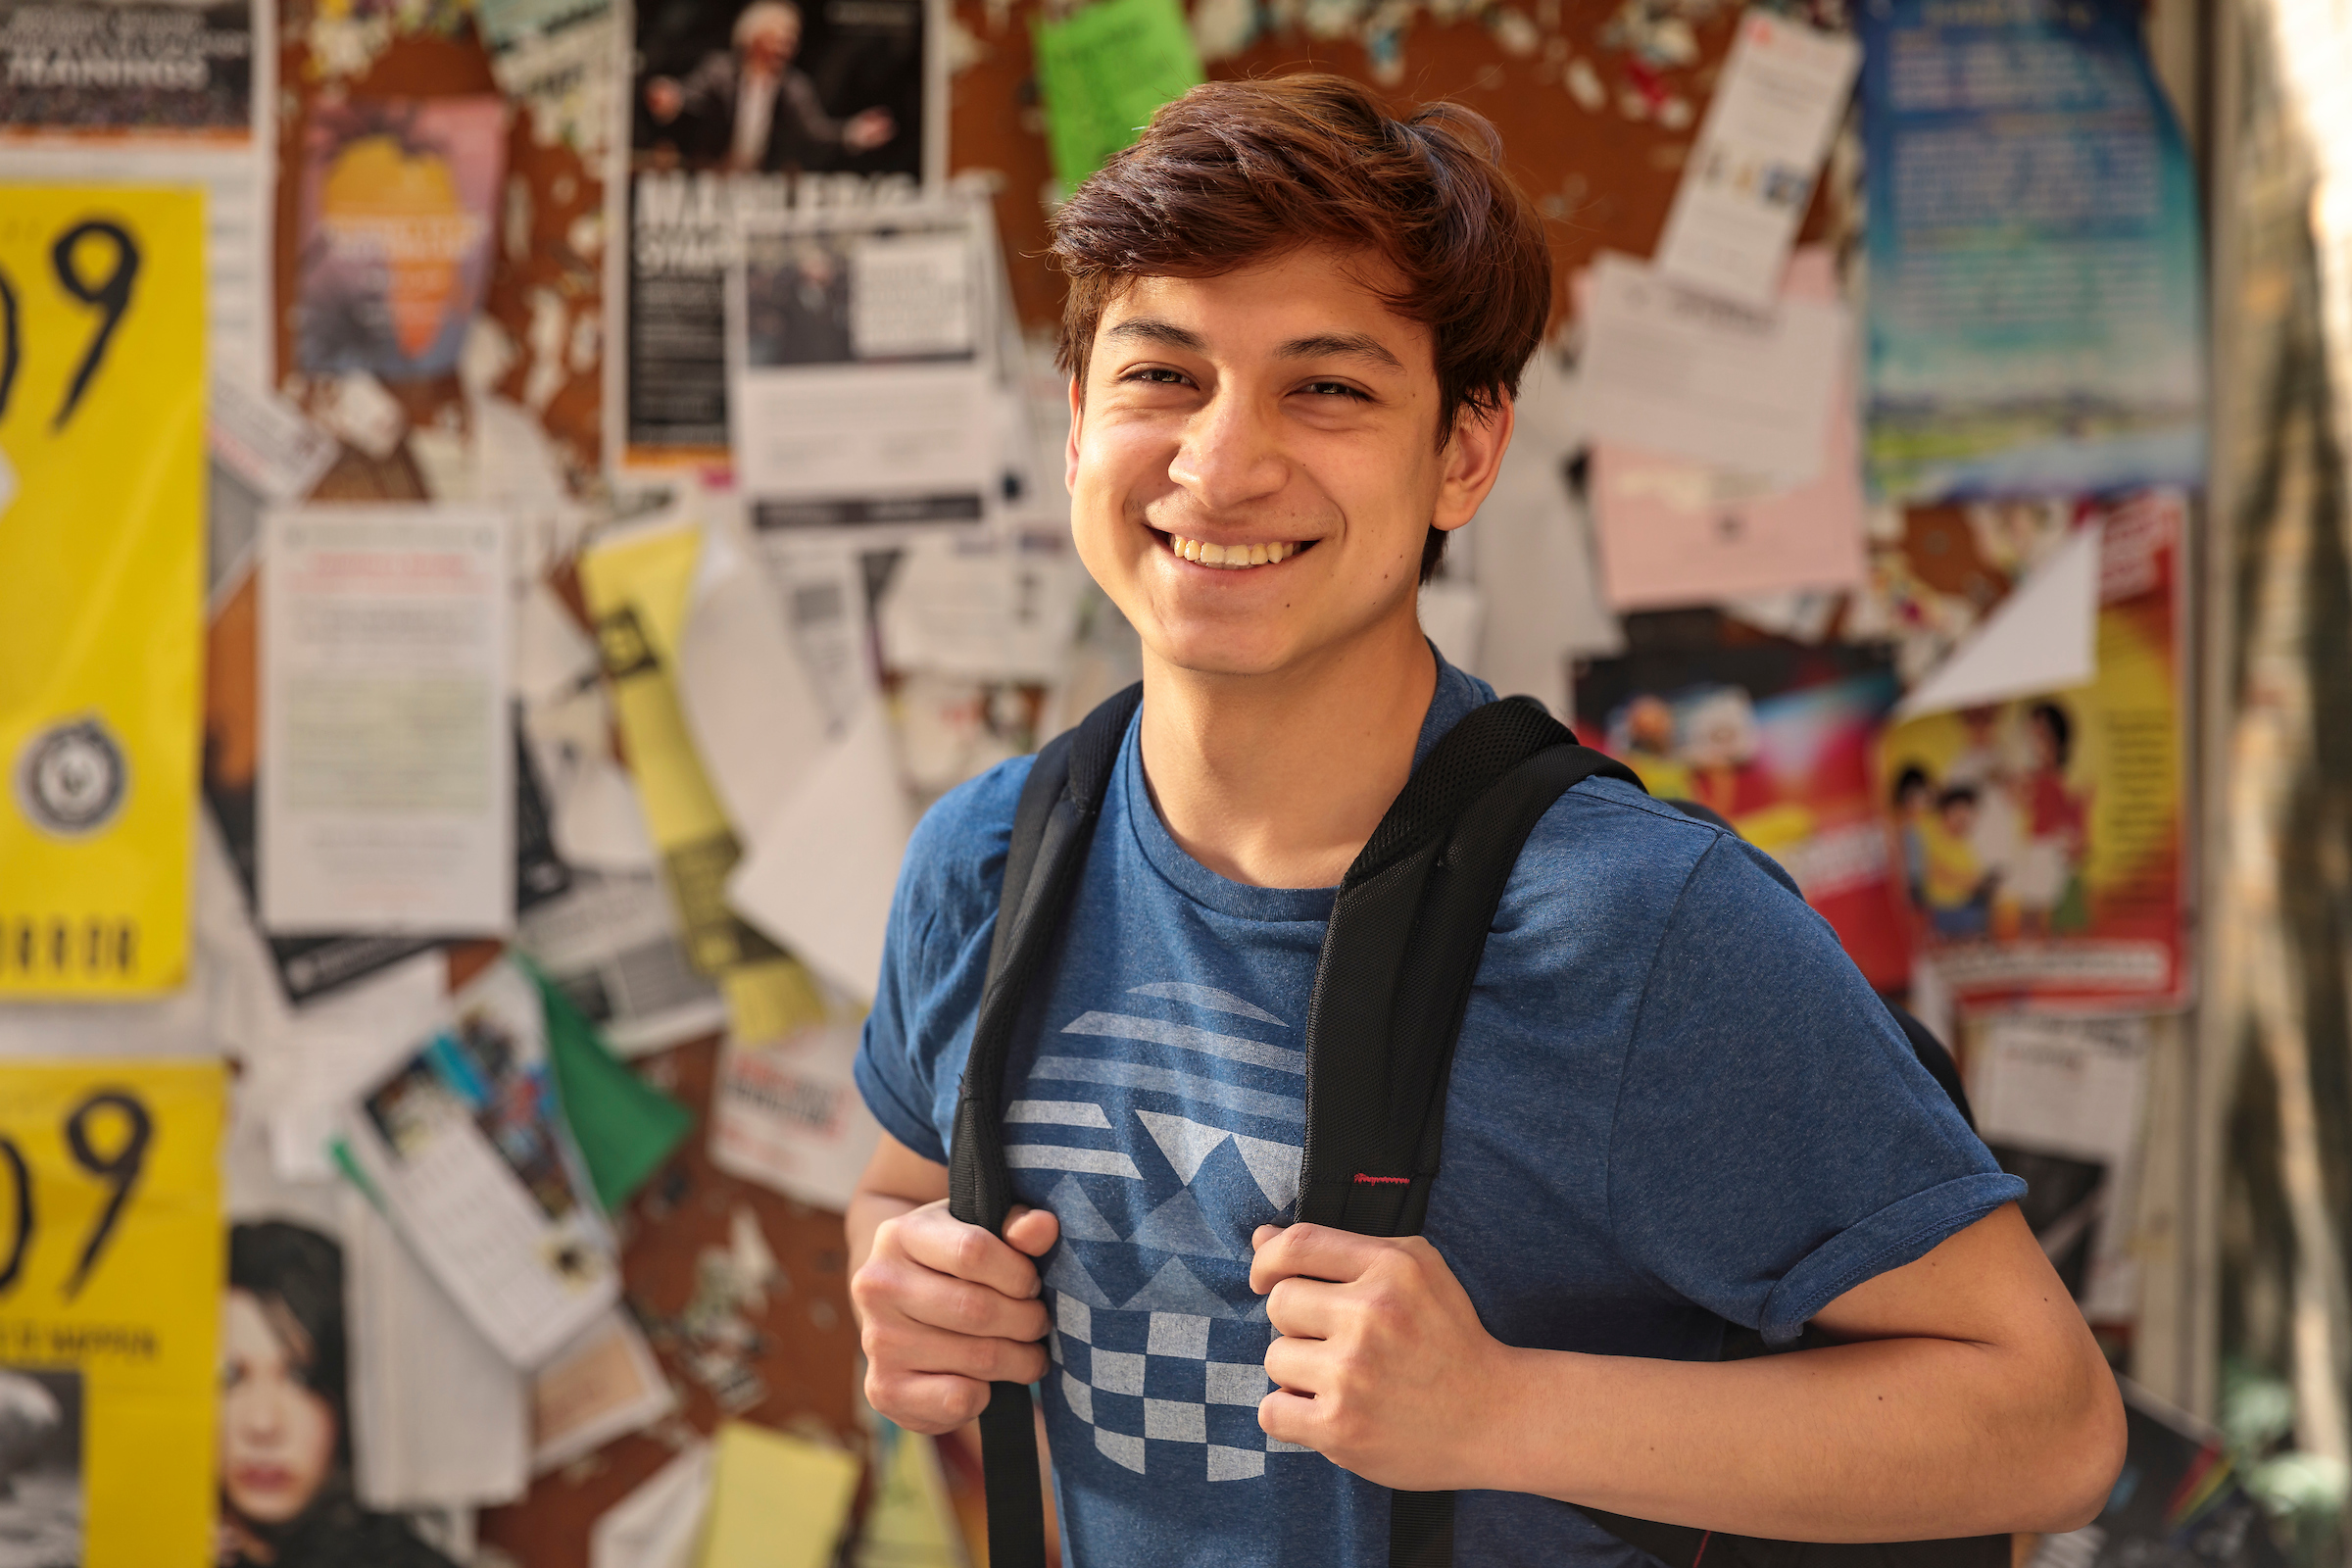 student smiling in front of bulletin board